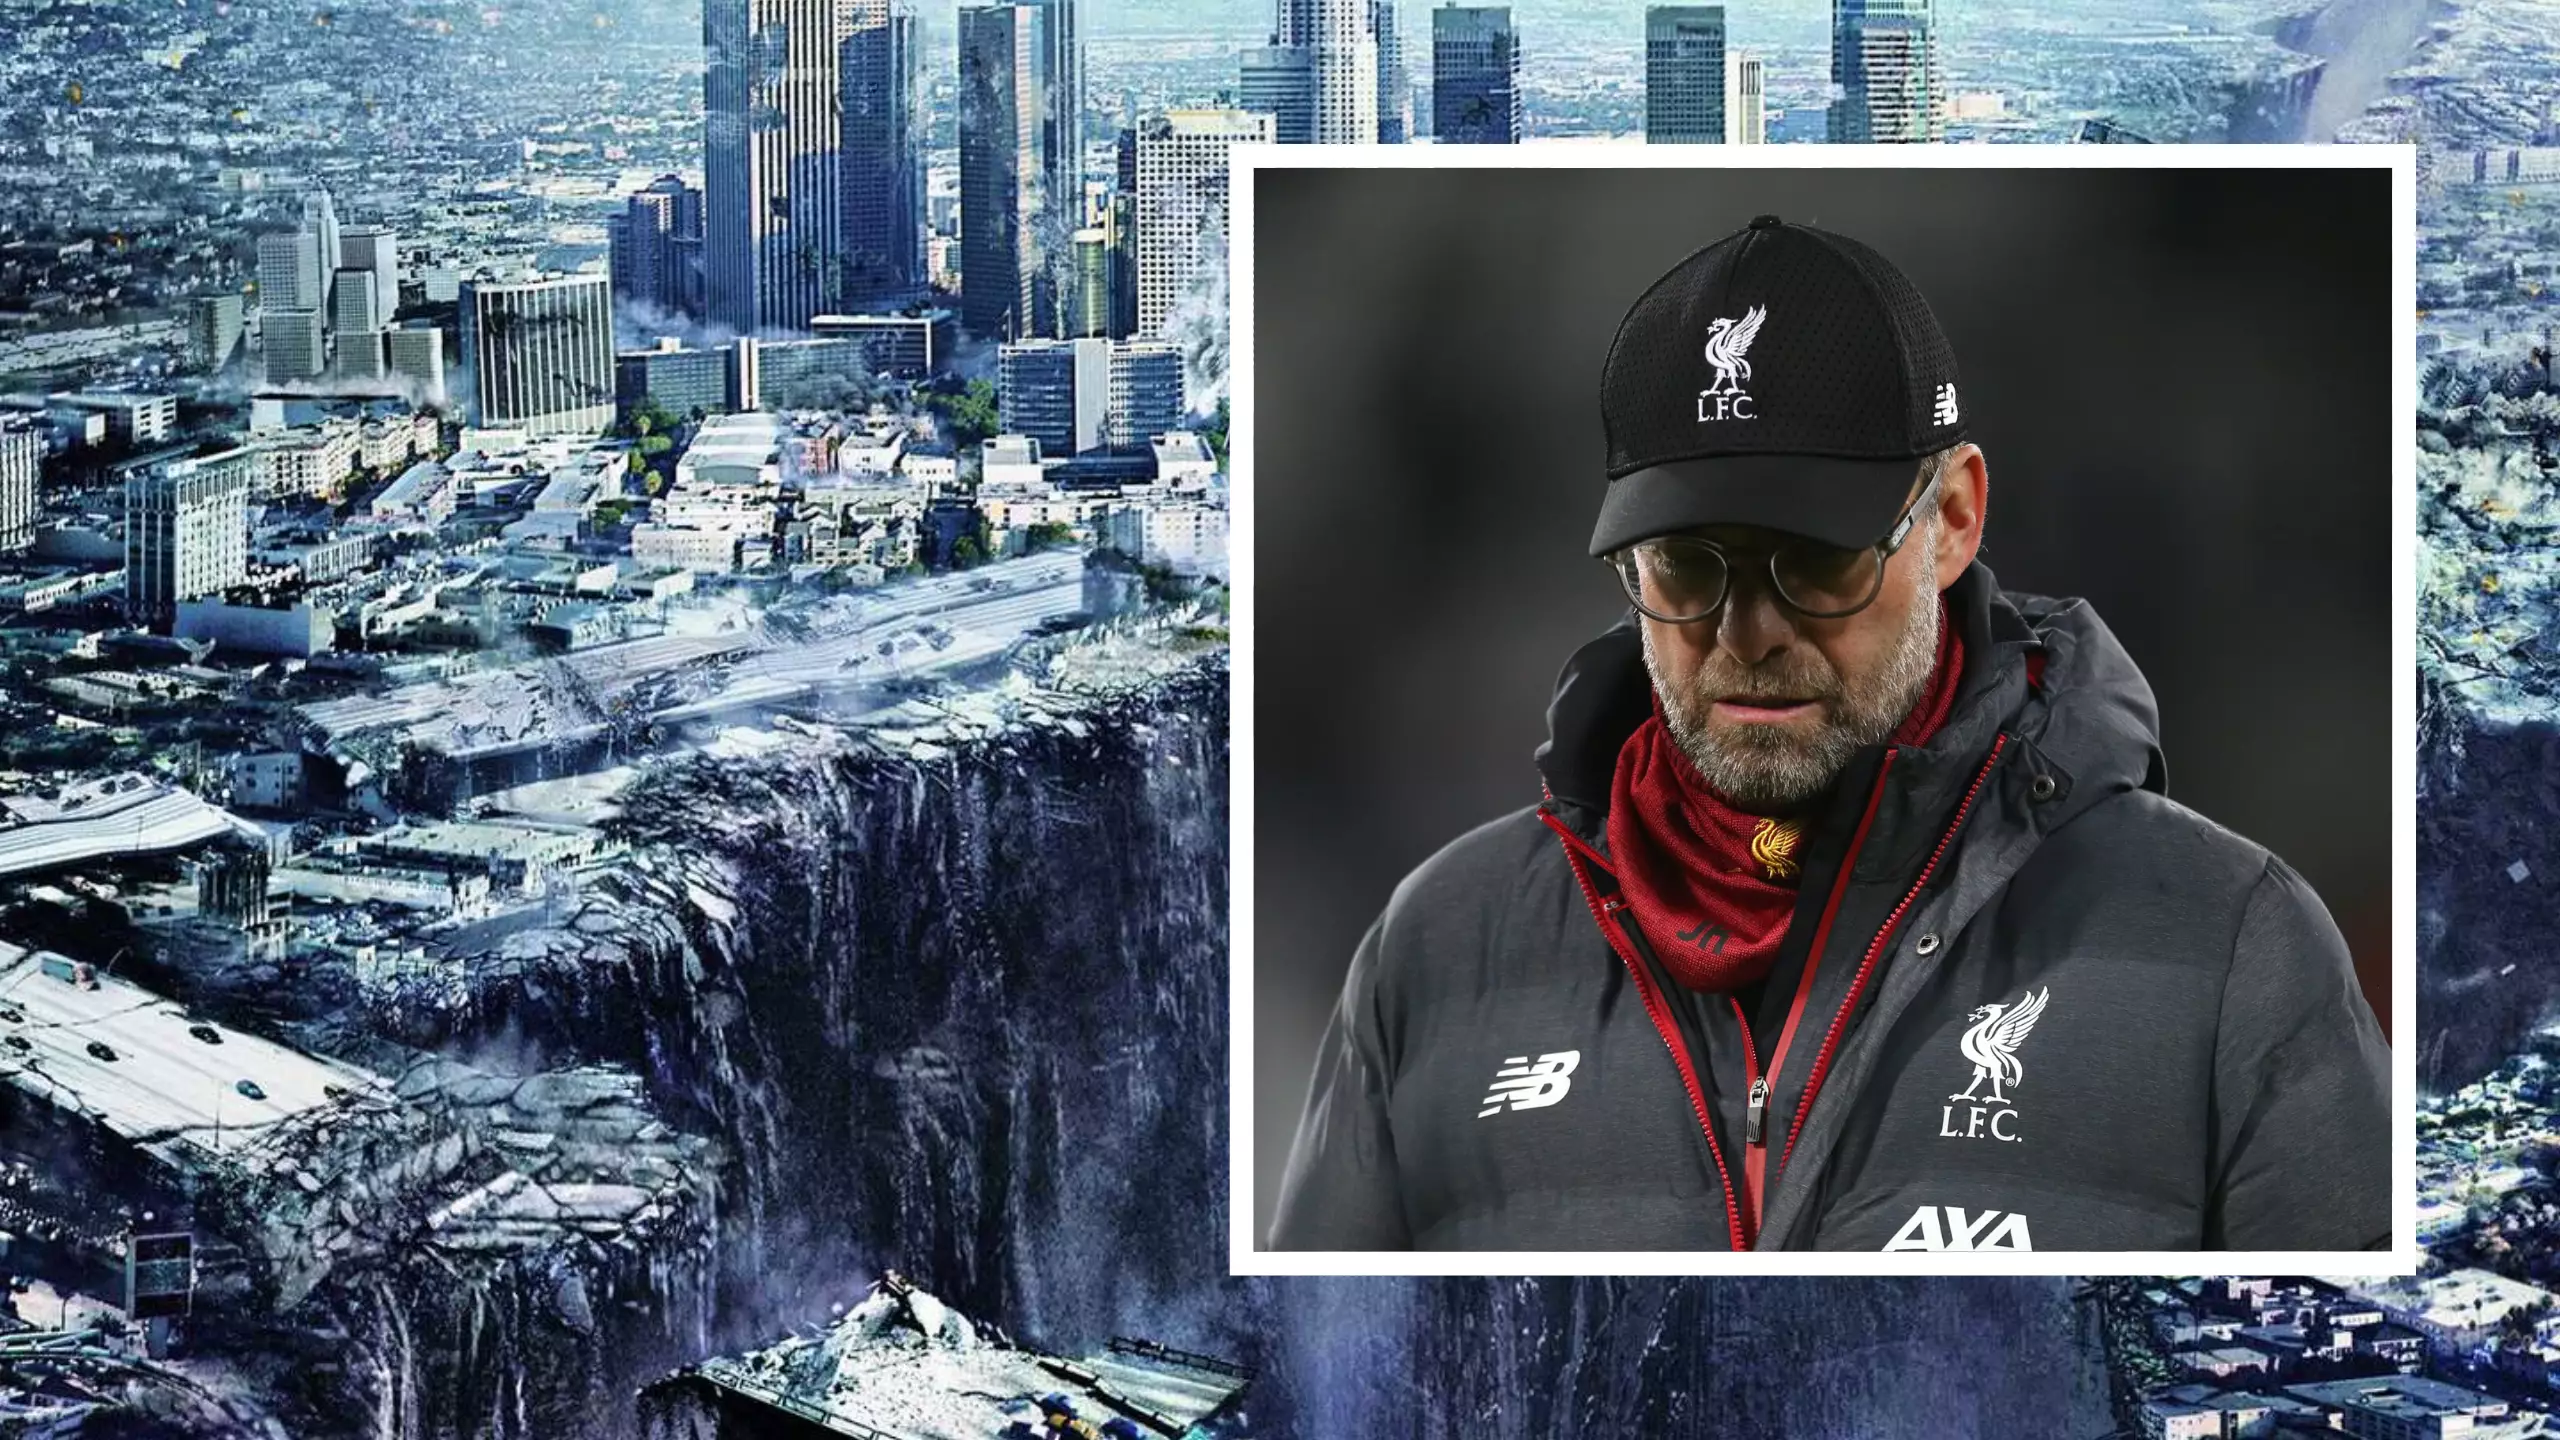 Conspiracy Theory Claims The World Will End On Sunday - When Liverpool Could Win The Premier League